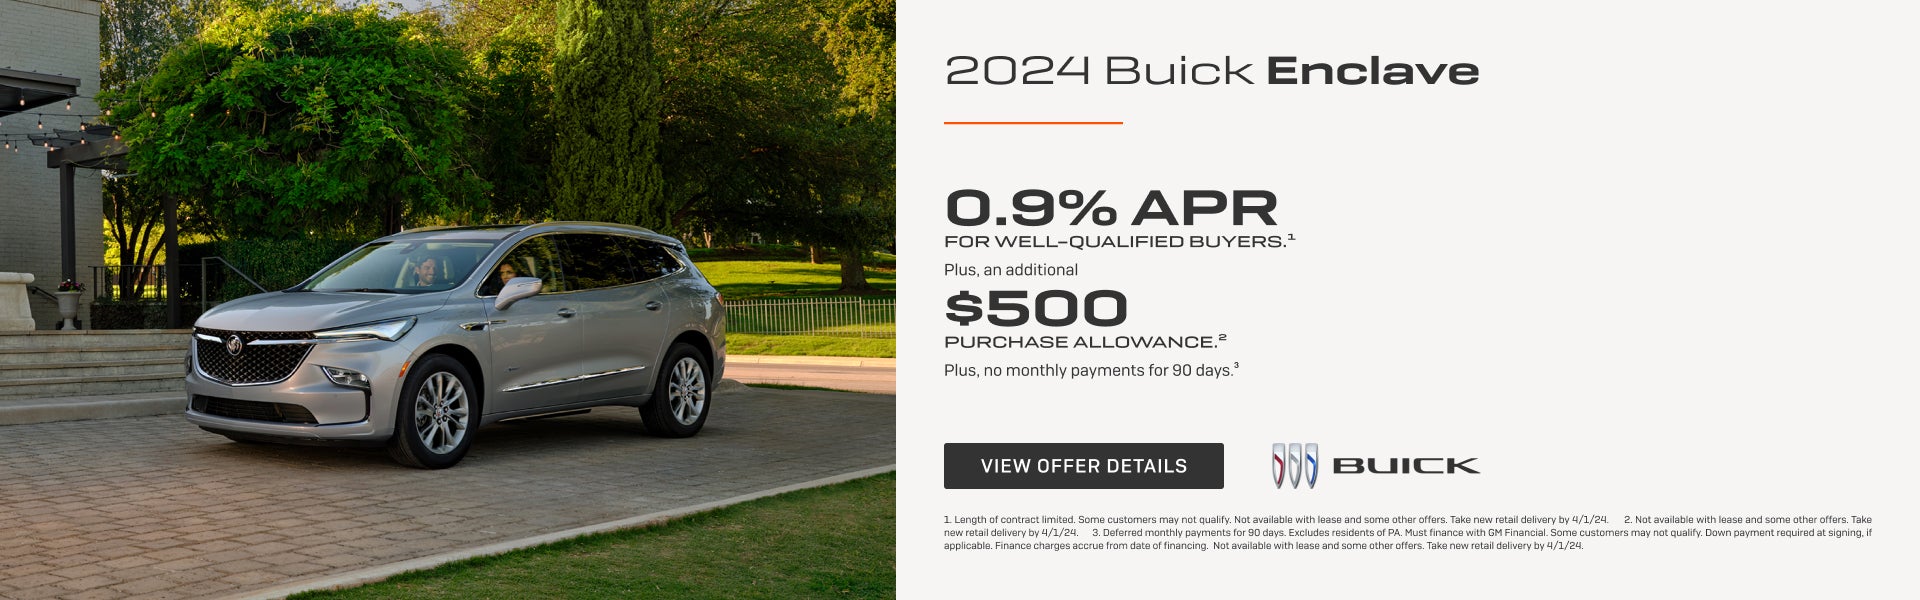 0.9% APR 
FOR WELL-QUALIFIED BUYERS.1

Plus, an additional $500 PURCHASE ALLOWANCE.2

Plus, no mo...